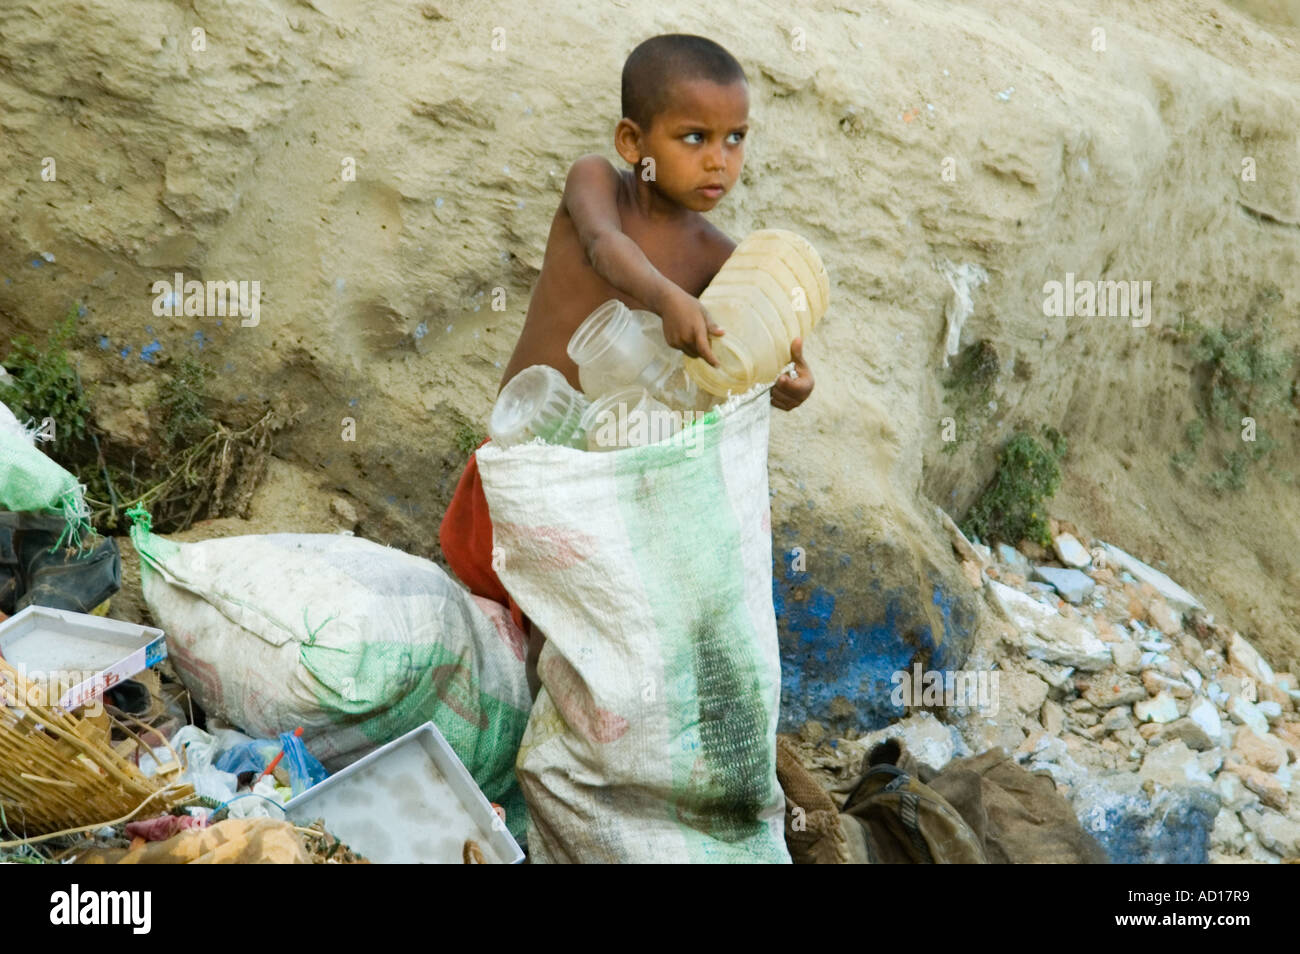 Horizontal portrait of a poor young boy collecting plastic containers on a pile of rubbish for recycling. Stock Photo